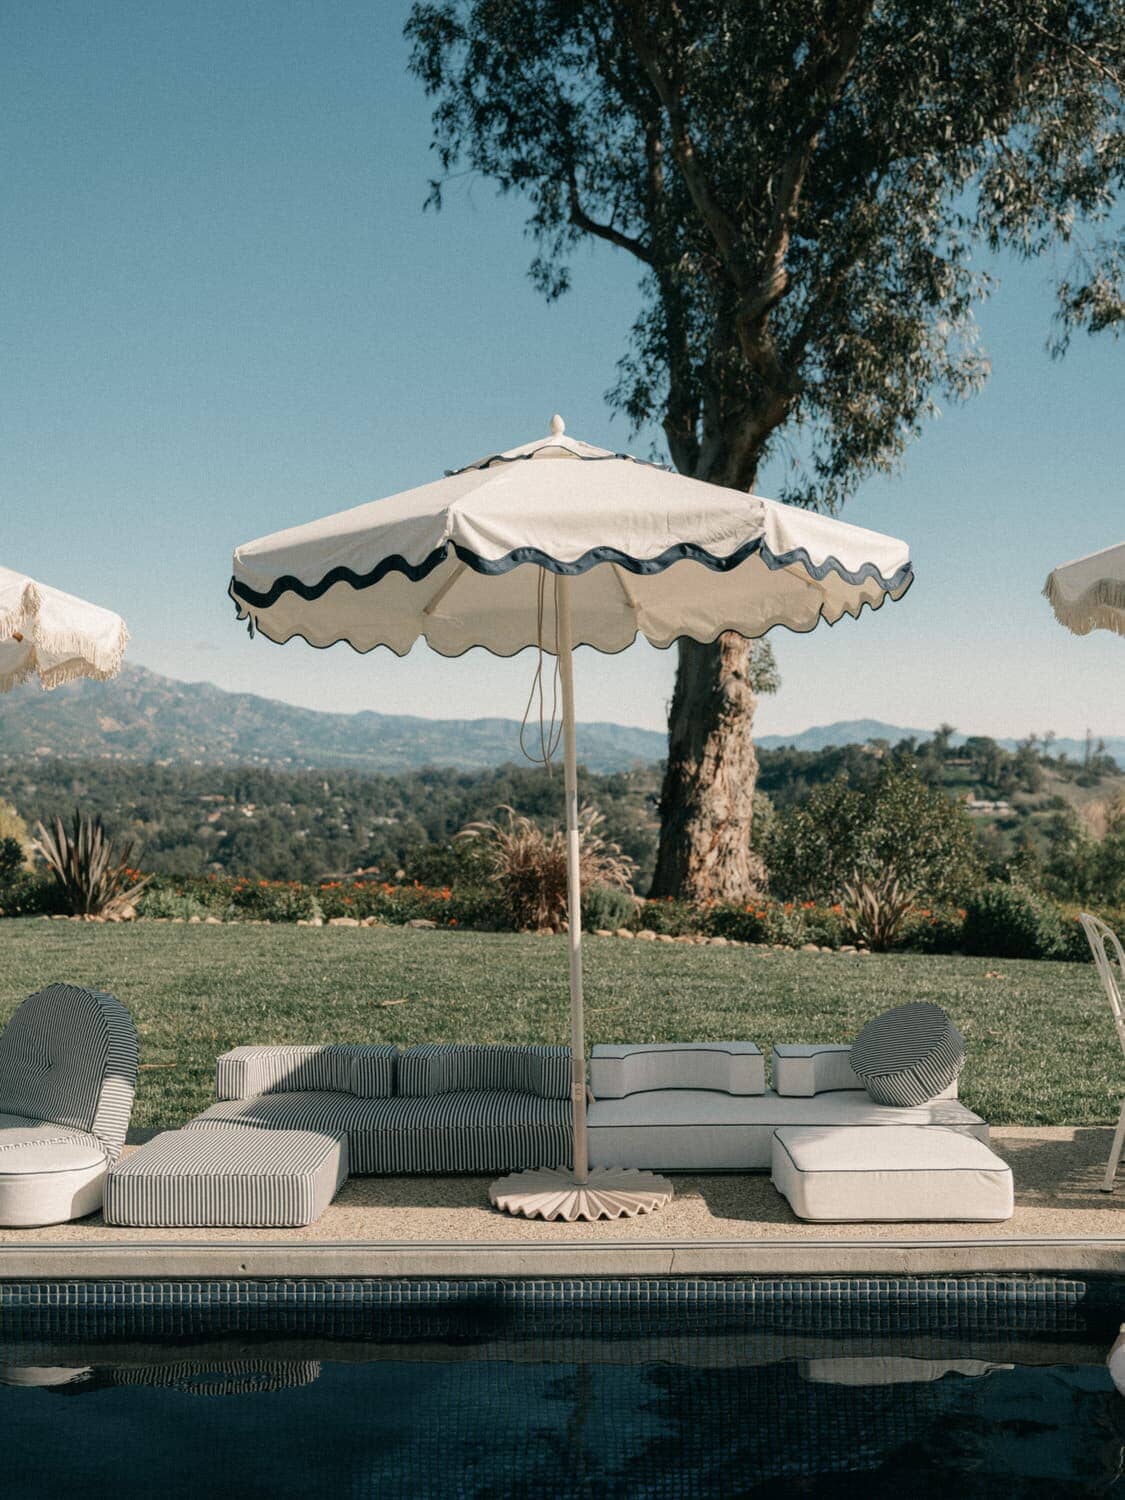 Outdoor pool setting with riviera white market umbrella and outdoor modular cushions.